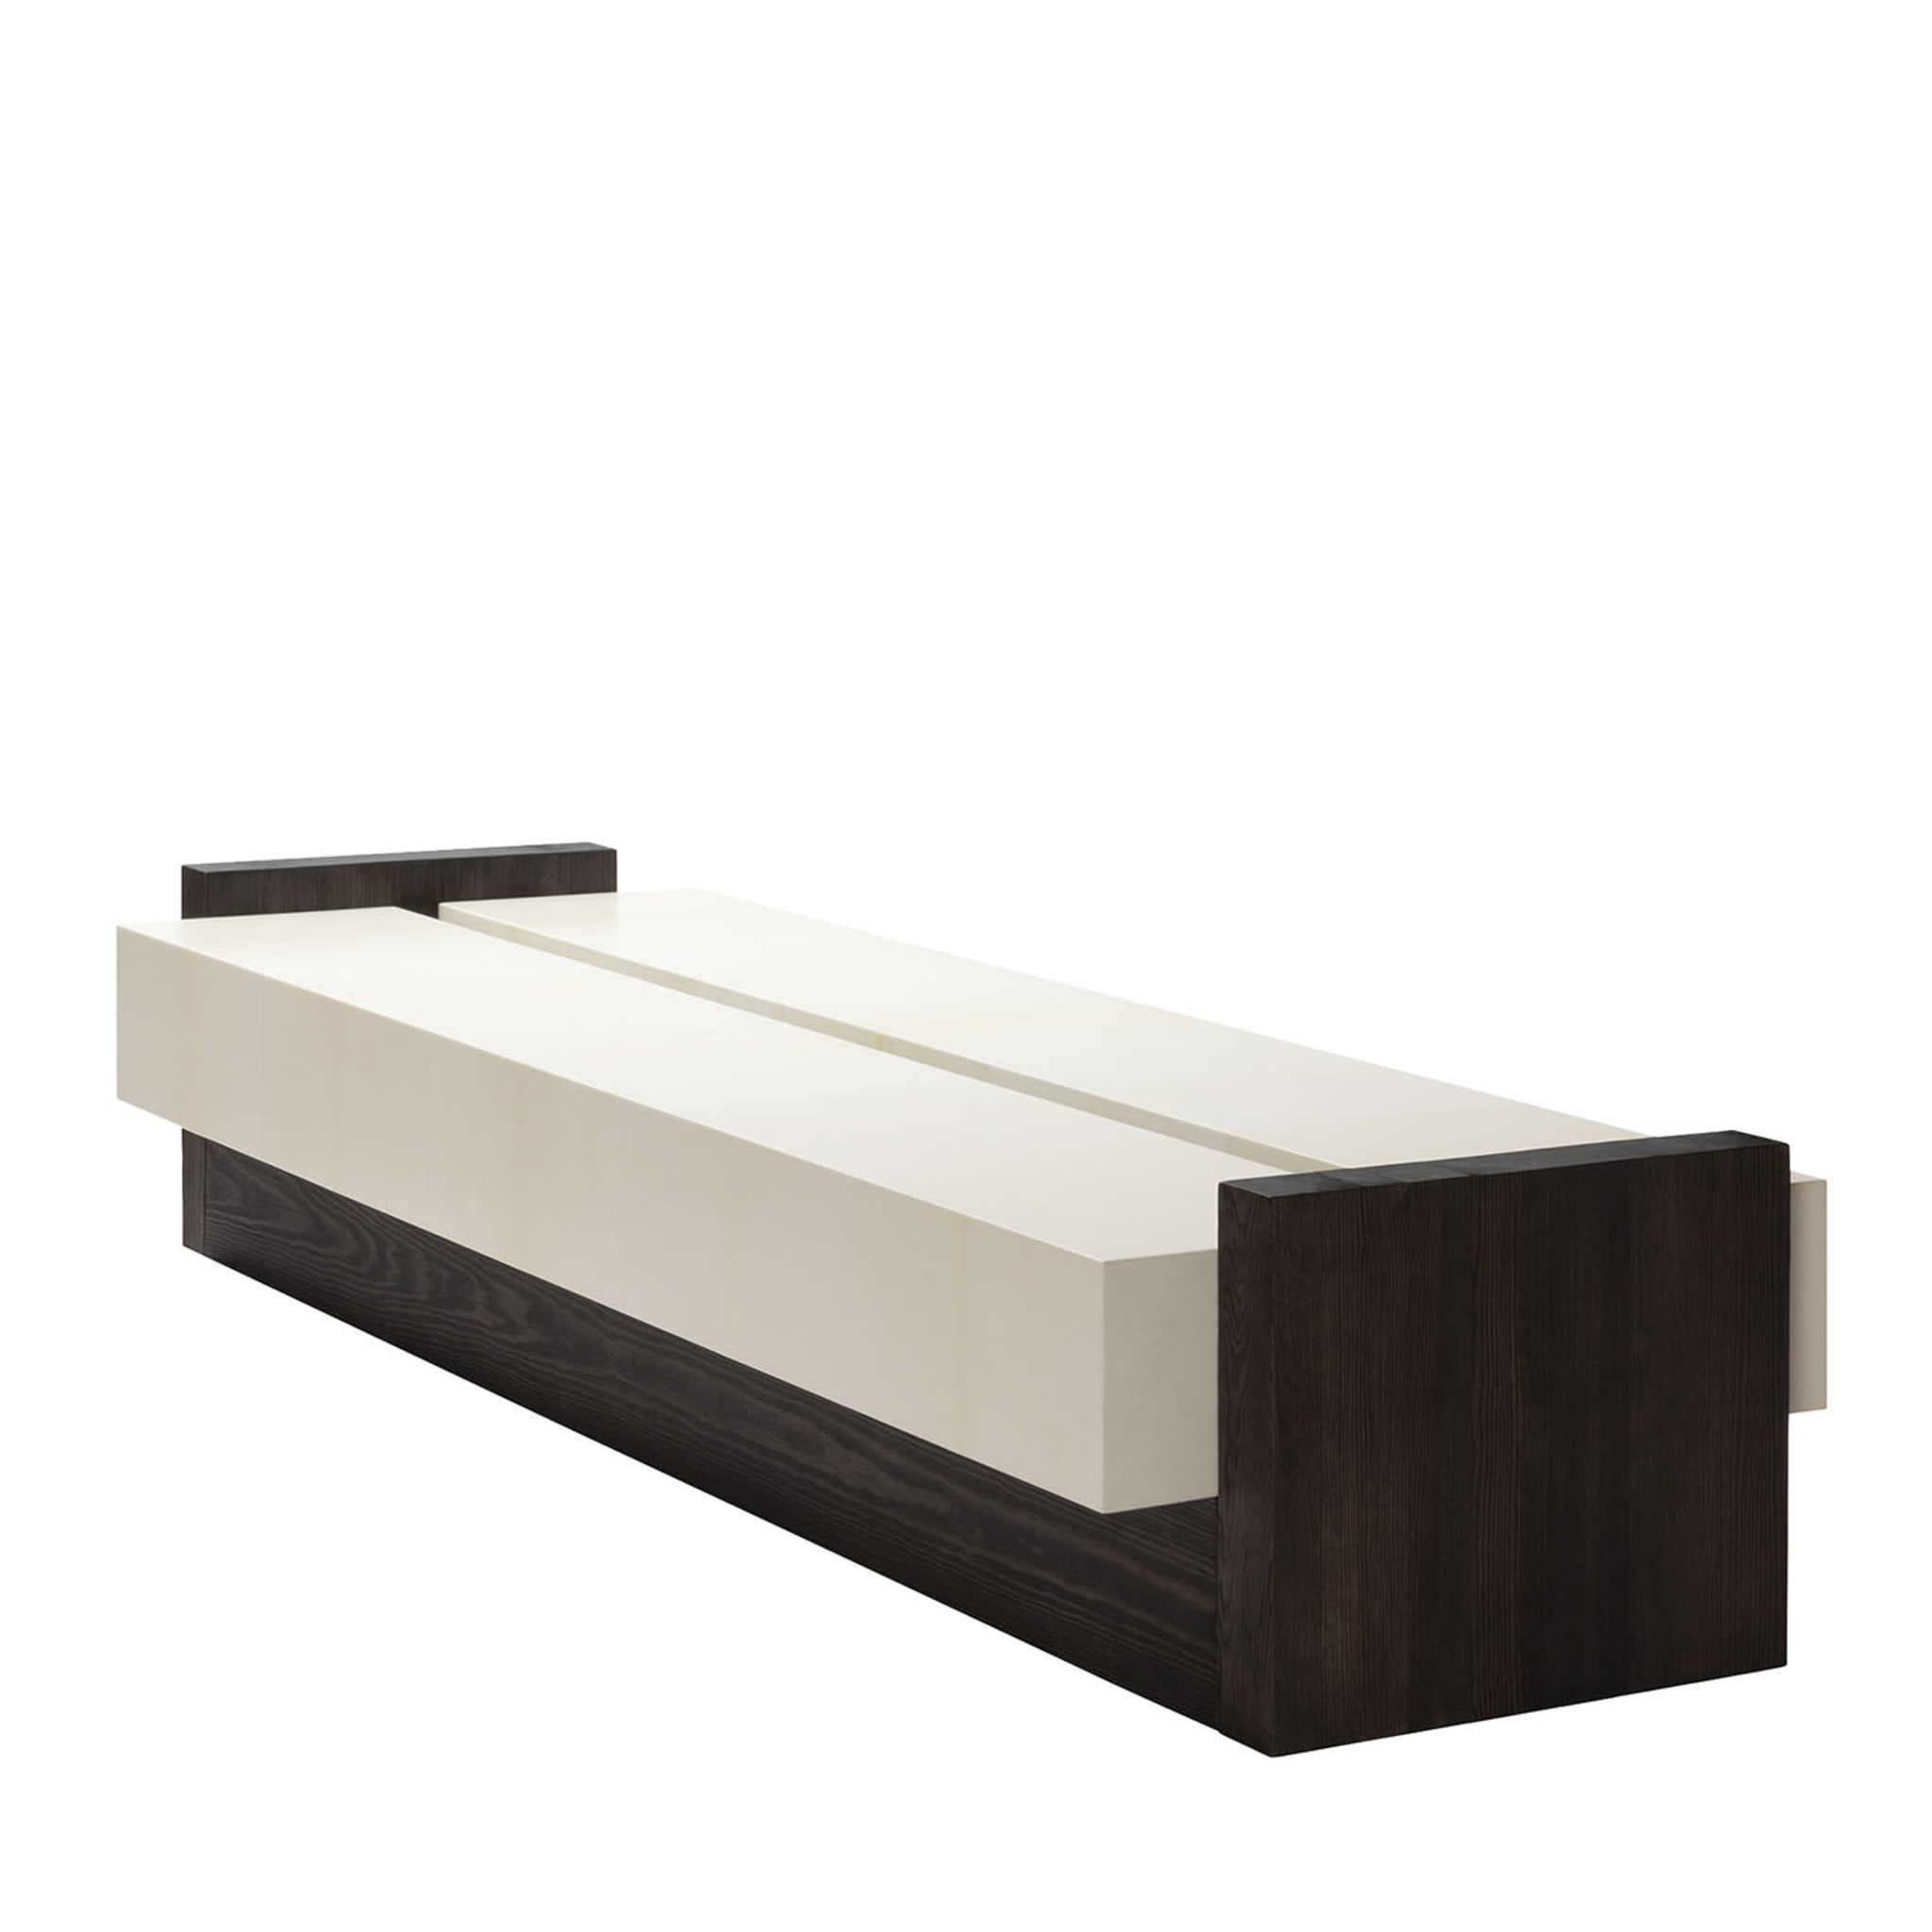 Attica Long Parchment Coffee Table  - Main view